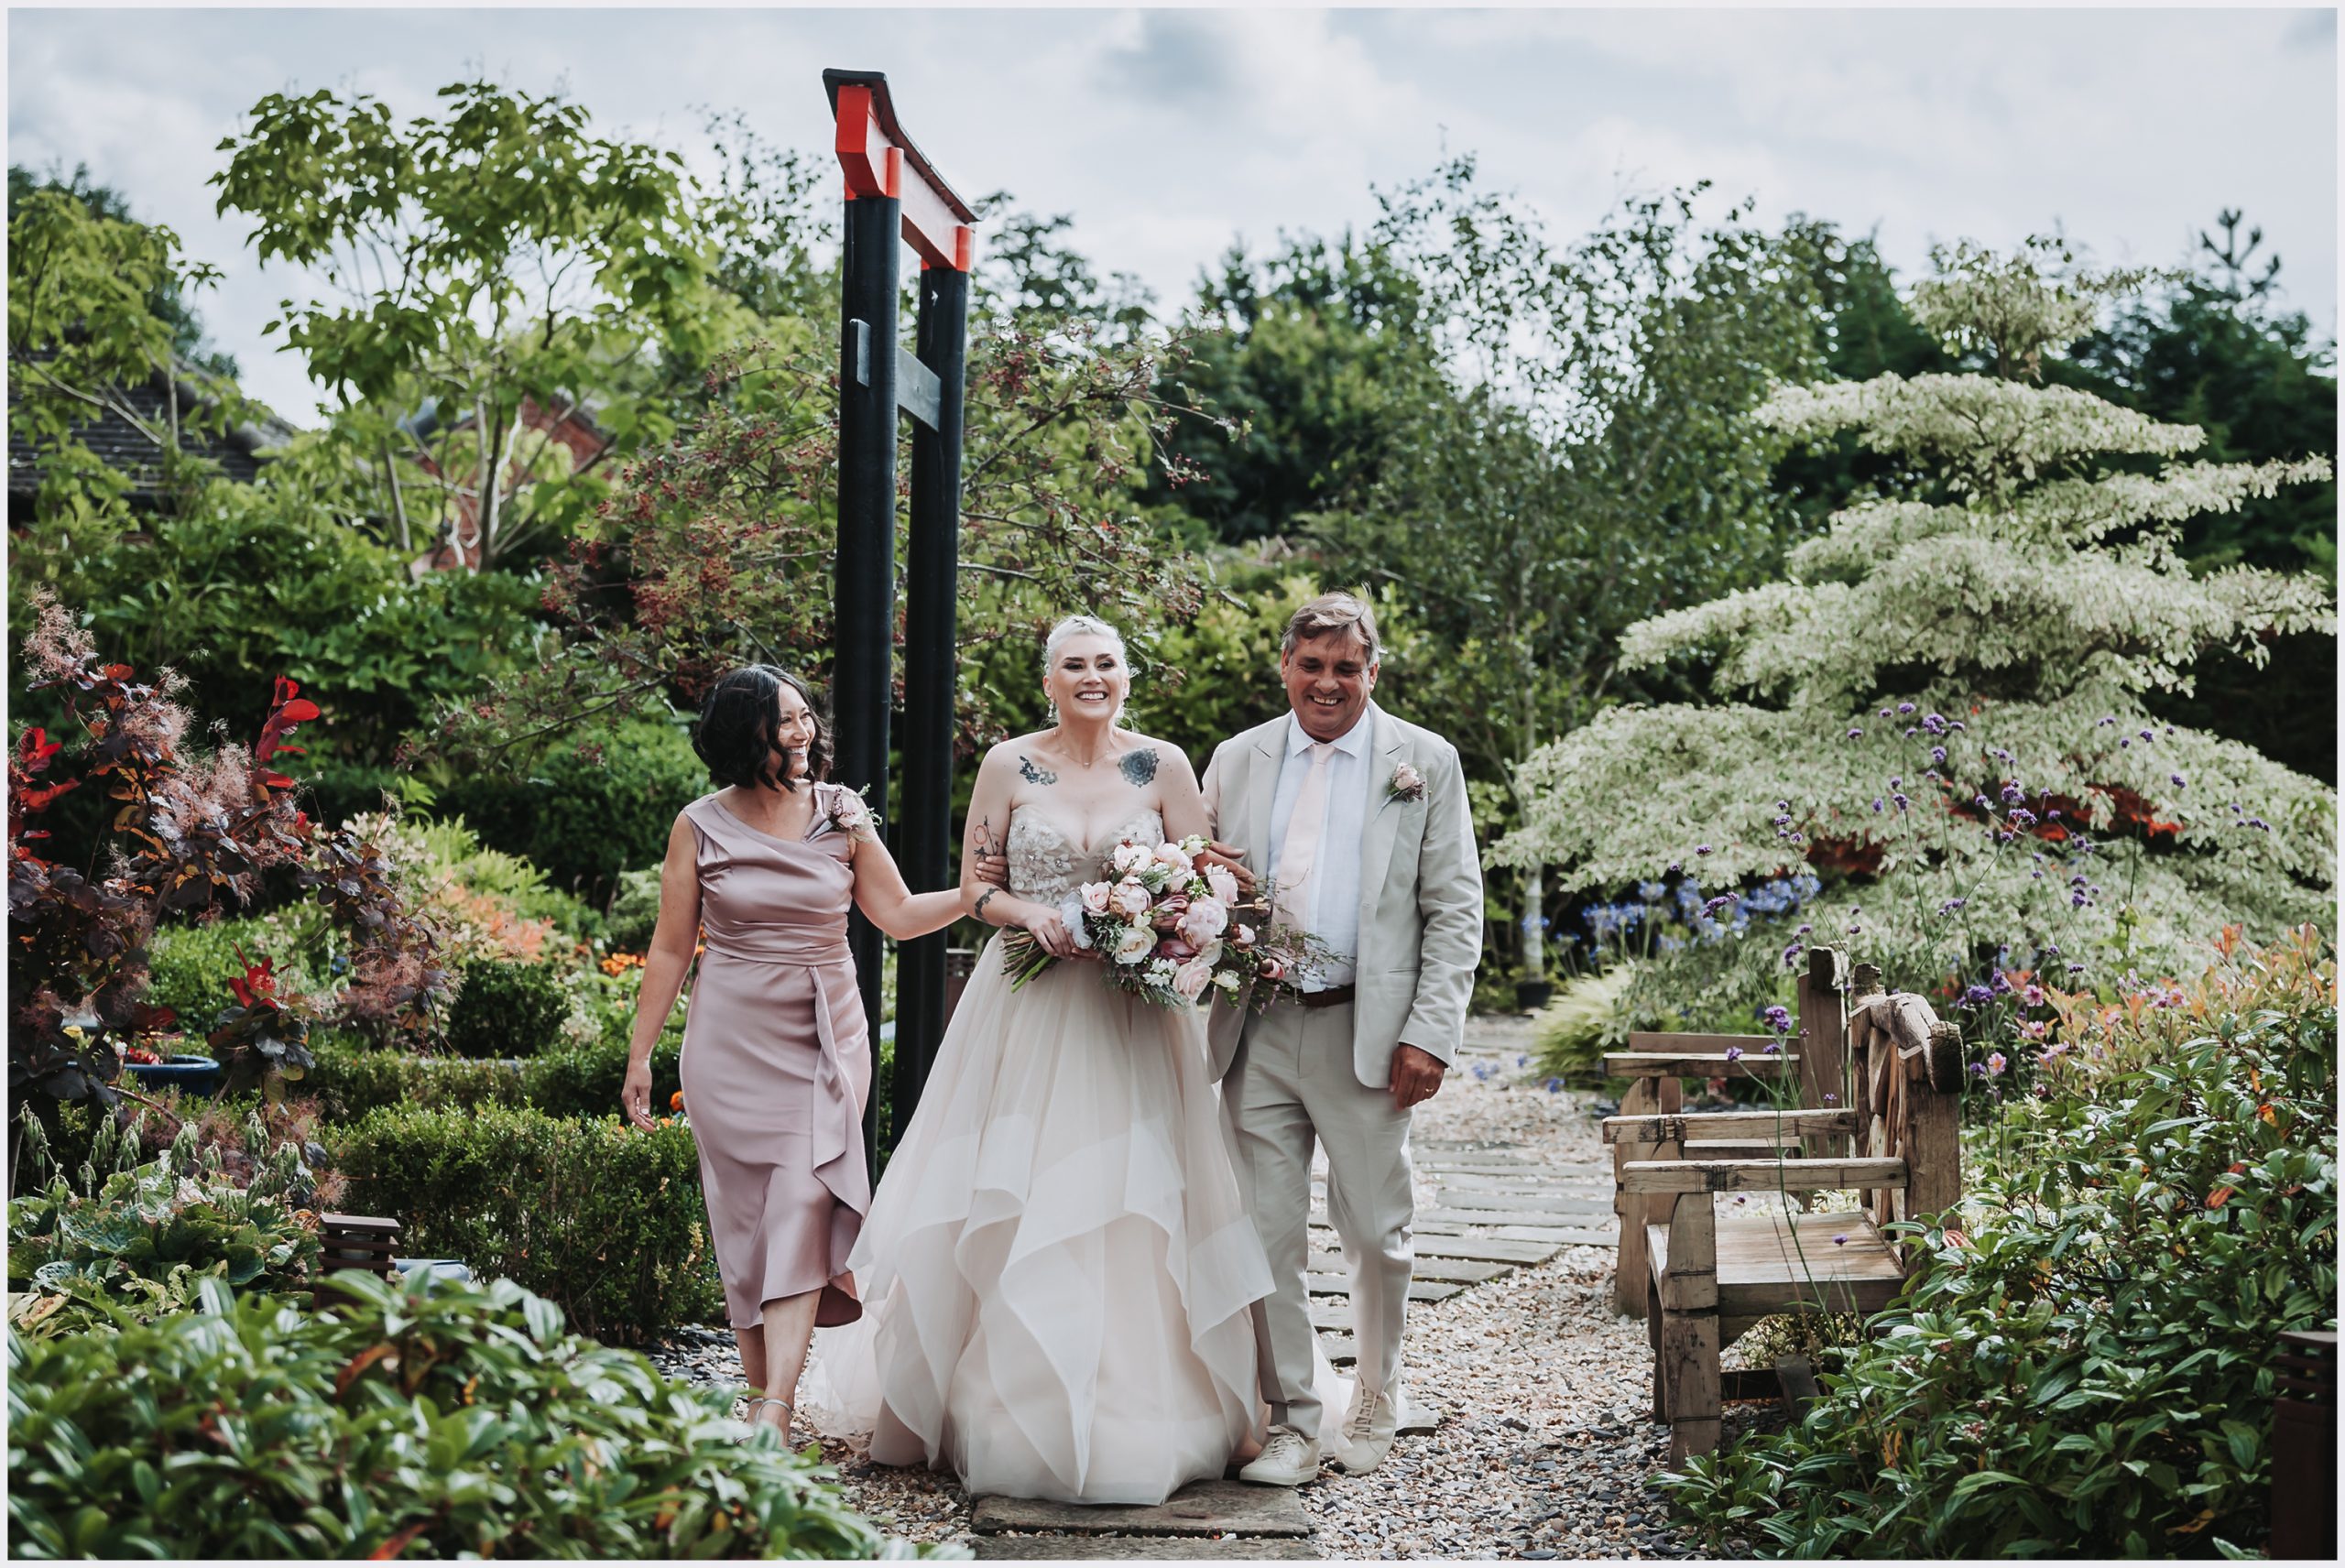 A beaming beautiful bride walks with her parents by her side.  The bride is carrying a beautiful bouquet of flowers and all three are smiling widely as they walk towards the outdoor wedding ceremony at The Grosveor Pulford Hotel and Spa.  Image captured by Helena Jayne Photography a north Wales based wedding photographer